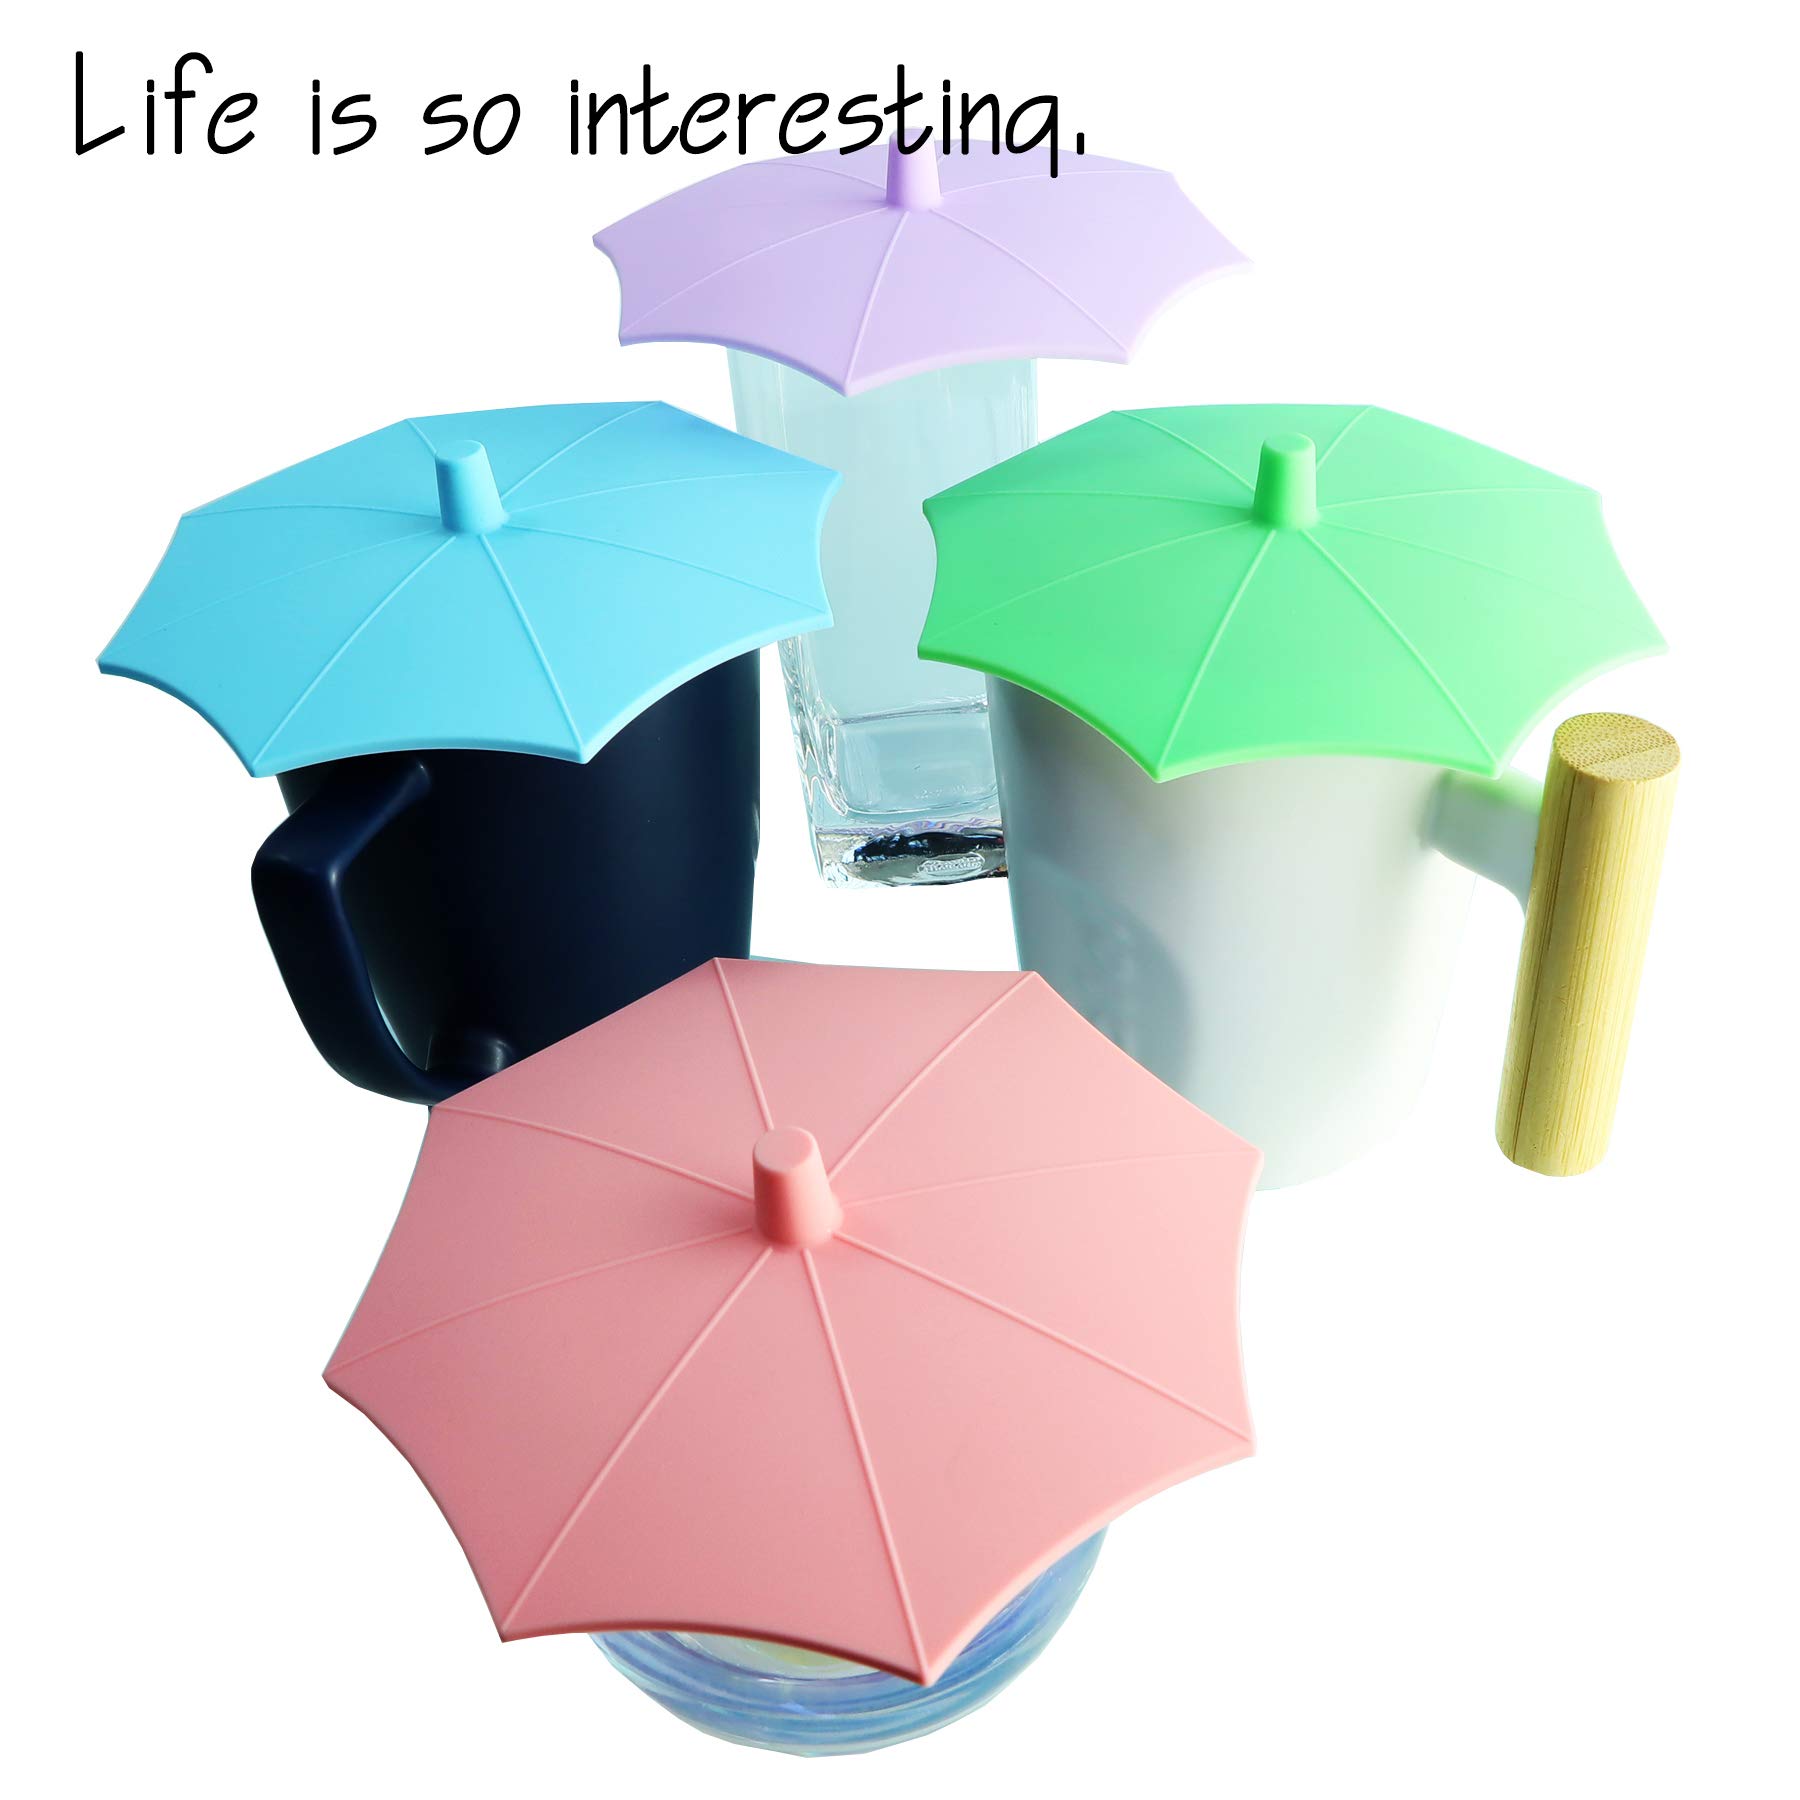 NEW Silicone Umbrella Cup Covers 4-Pack(Upgrade oct. 2020),Food Grade Lids Keep Drinks Warm or Cold Longer, Lids for Mugs, Cups, Tea Pots, Flexible Mug Covers, Cup Lids for Coffee & Tea.(Mix Colour)